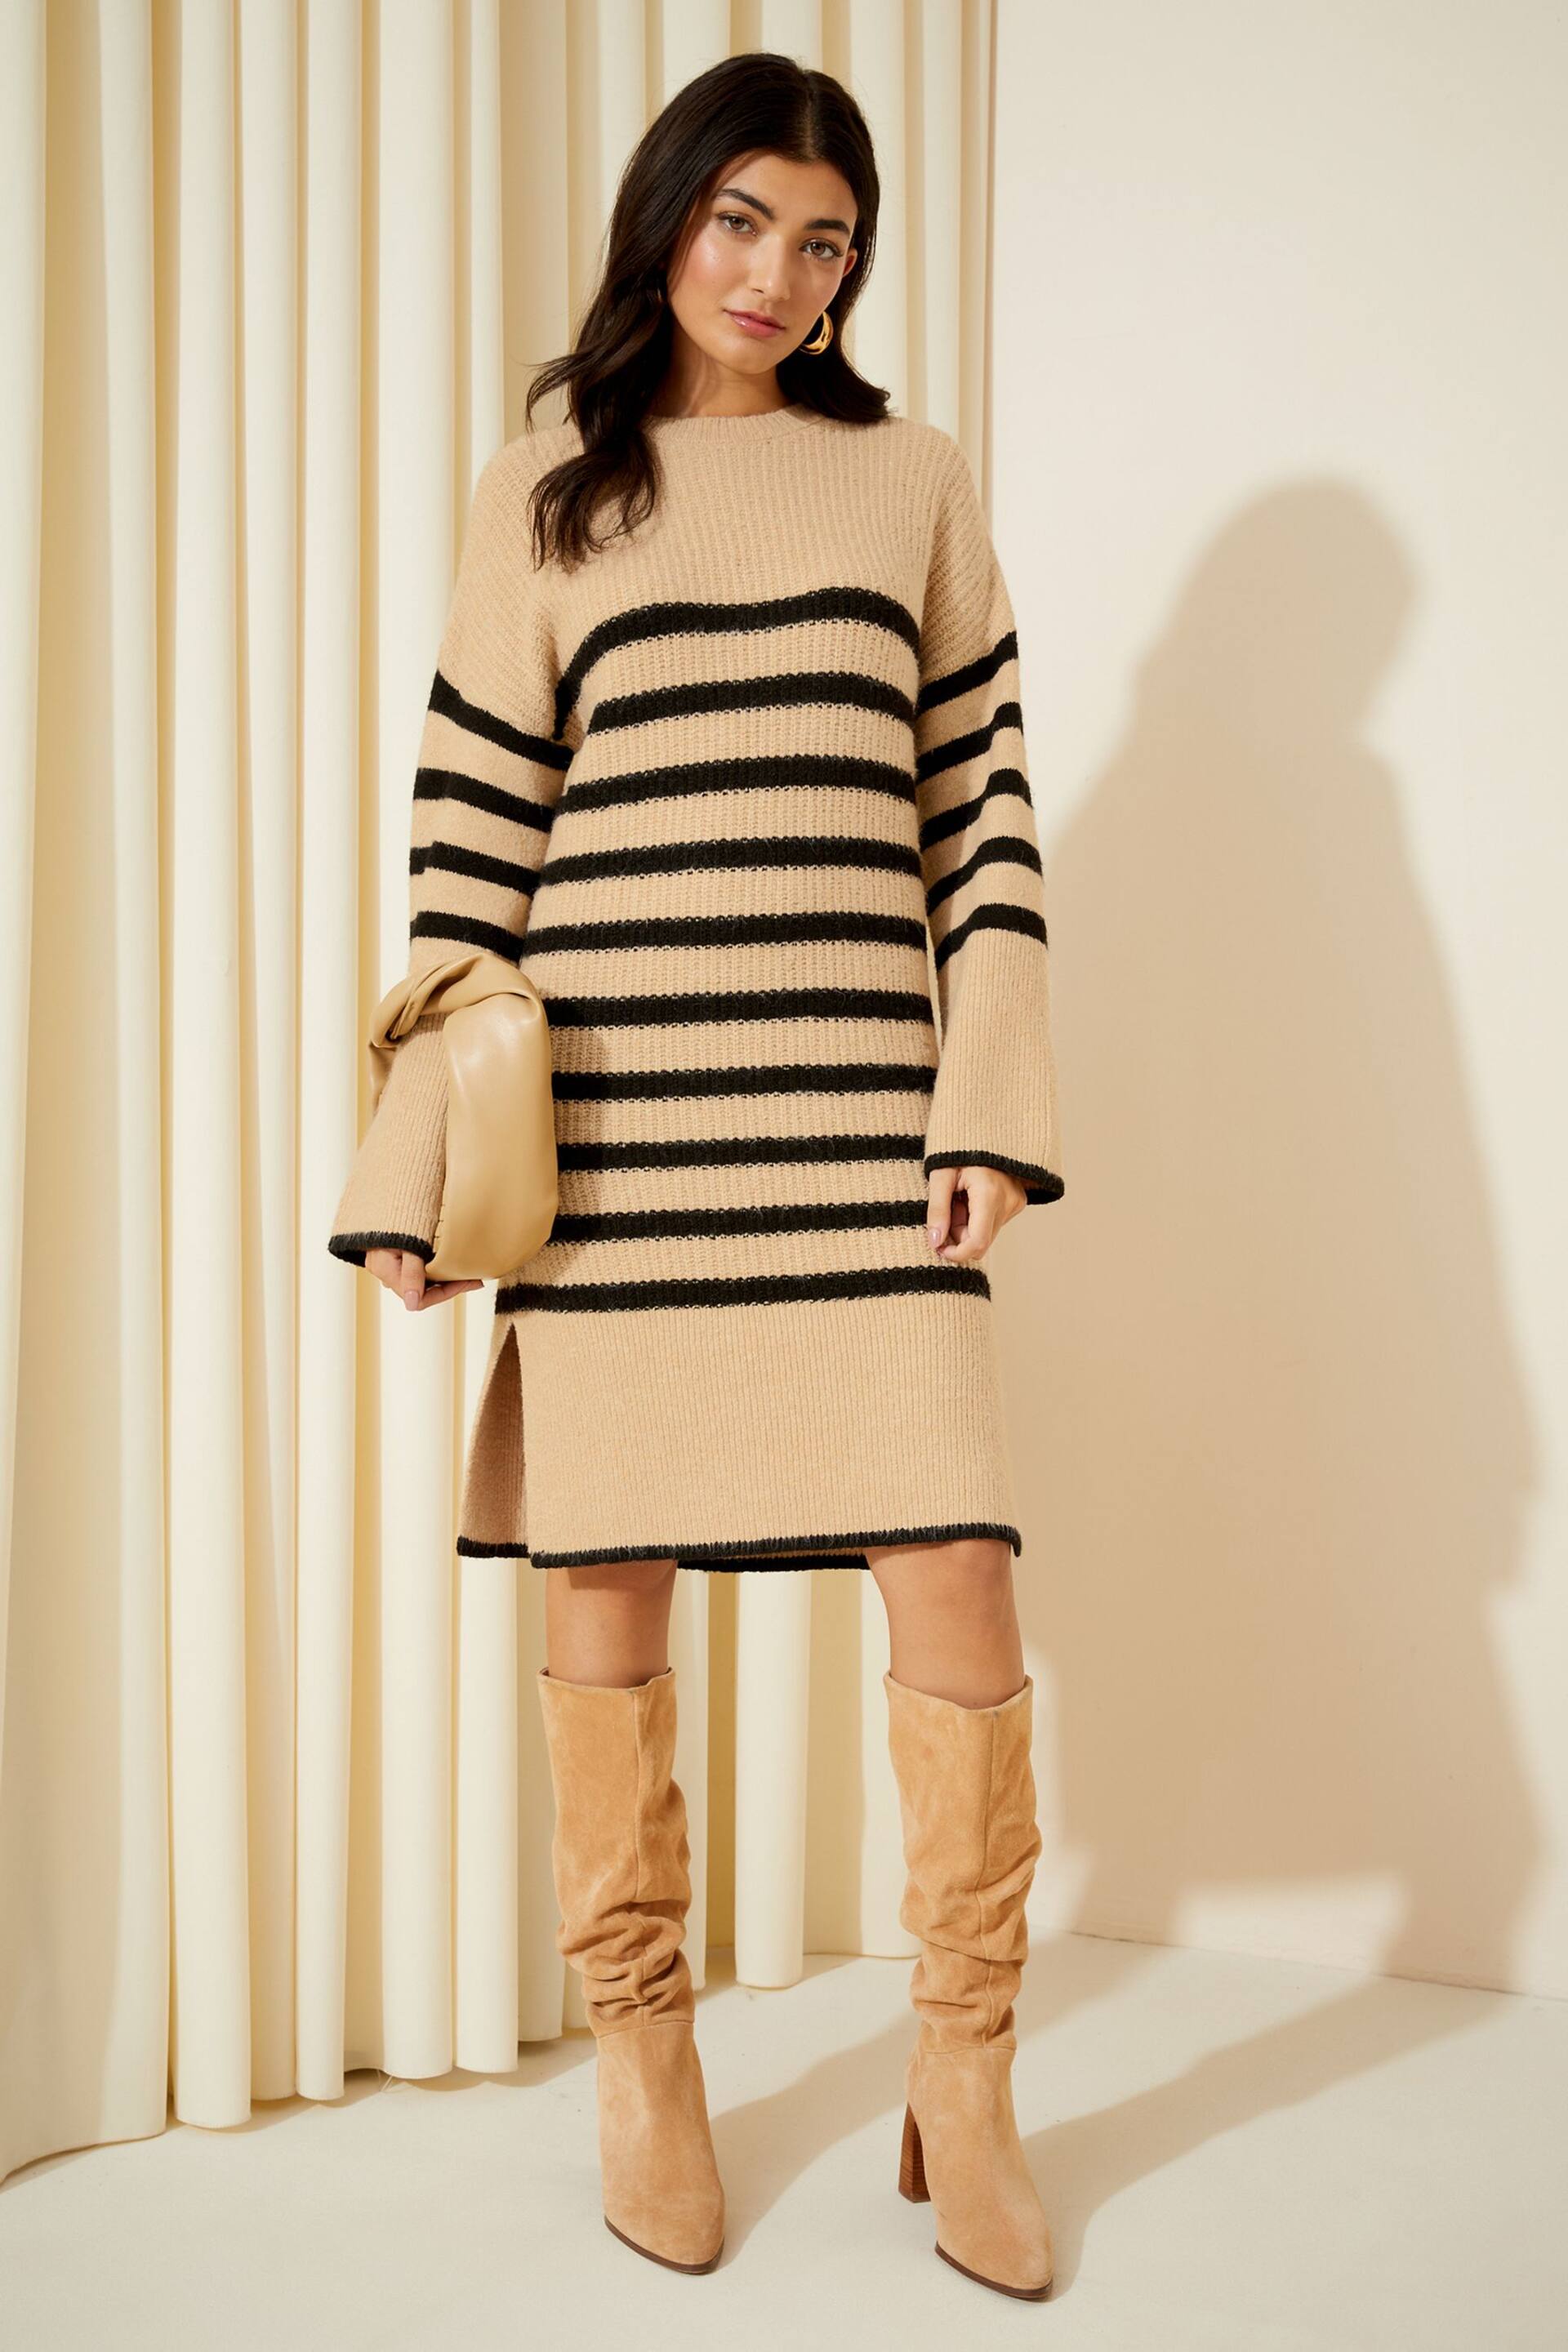 Friends Like These Camel stripe Striped Knitted Long Sleeve Jumper Dress - Image 1 of 4